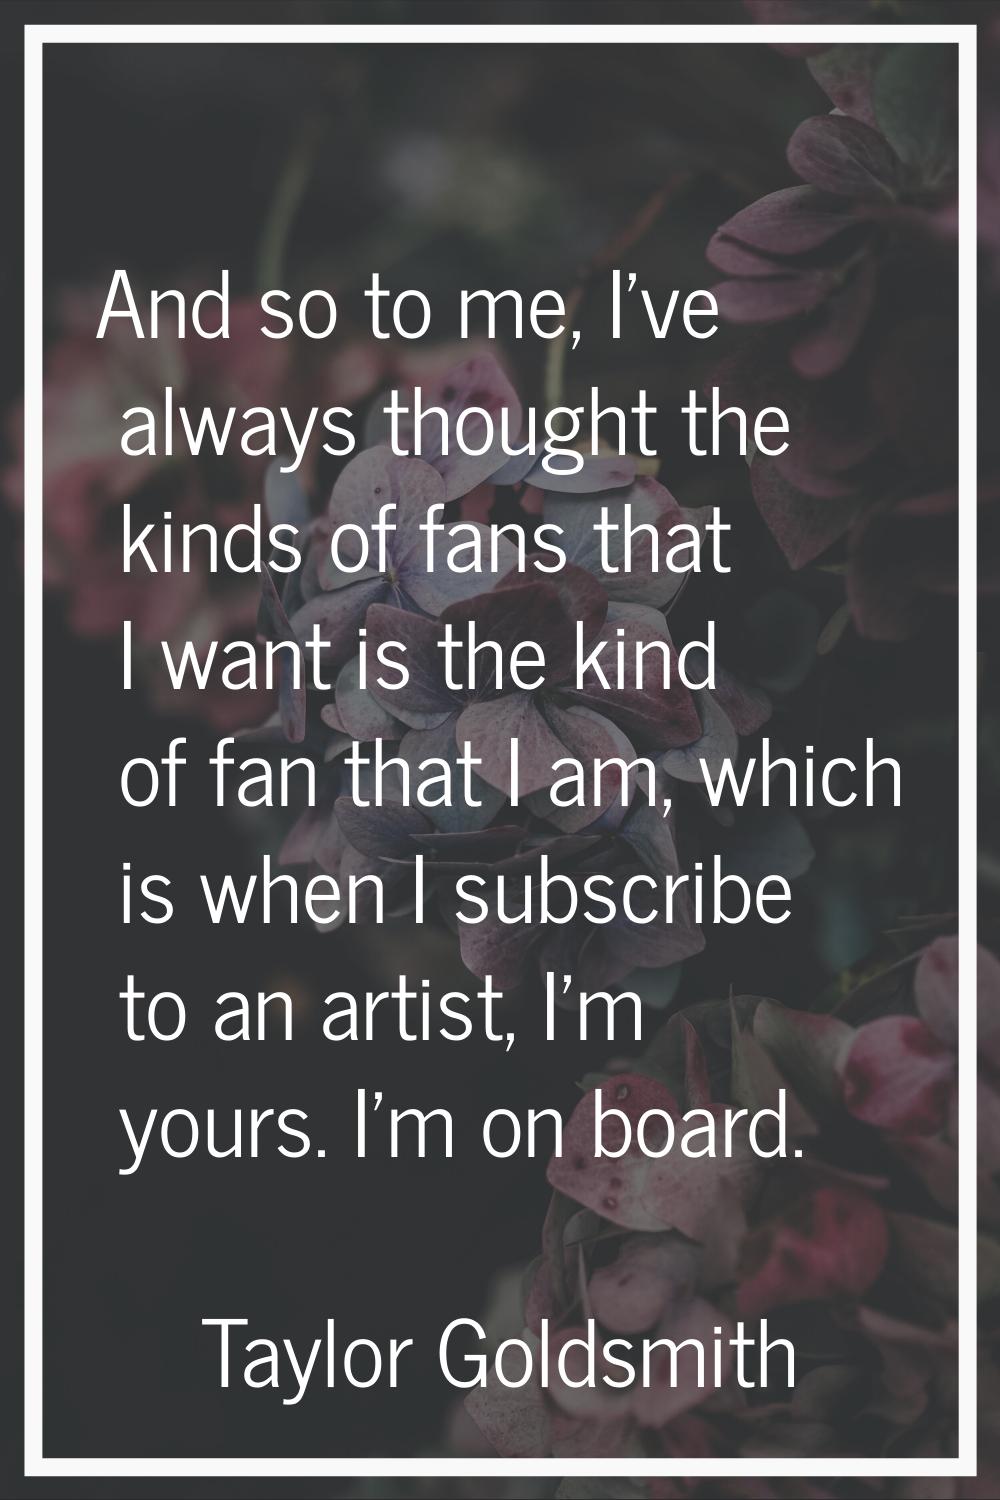 And so to me, I've always thought the kinds of fans that I want is the kind of fan that I am, which